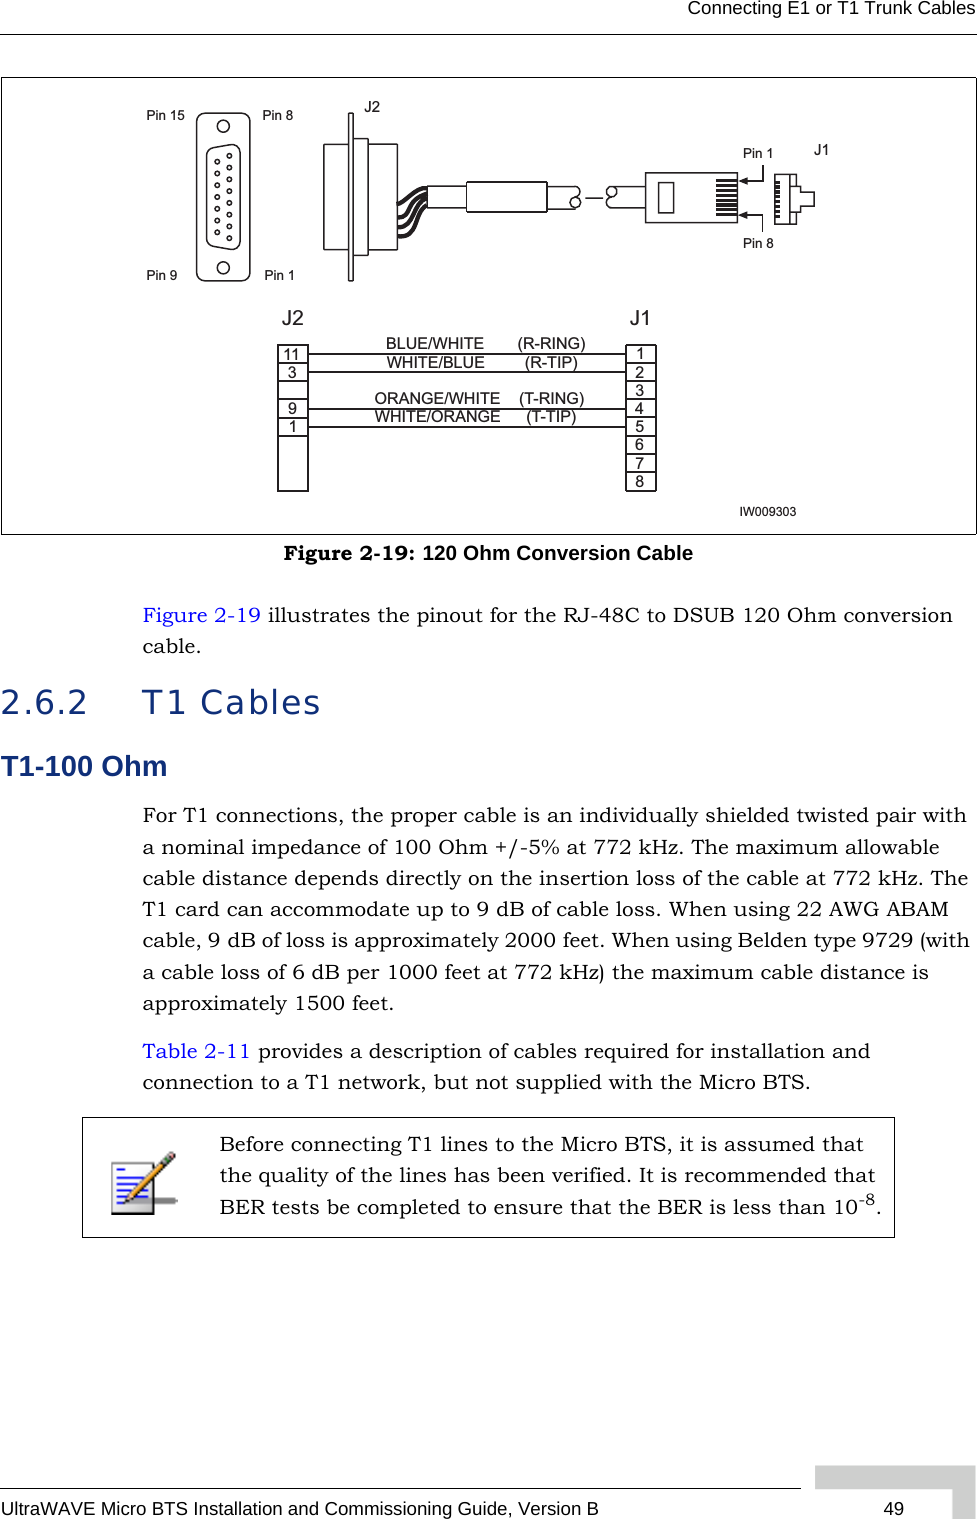 UltraWAVE Micro BTS Installation and Commissioning Guide, Version B 49Connecting E1 or T1 Trunk CablesFigure 2-19 illustrates the pinout for the RJ-48C to DSUB 120 Ohm conversion cable.2.6.2 T1 CablesT1-100 OhmFor T1 connections, the proper cable is an individually shielded twisted pair with a nominal impedance of 100 Ohm +/-5% at 772 kHz. The maximum allowable cable distance depends directly on the insertion loss of the cable at 772 kHz. The T1 card can accommodate up to 9 dB of cable loss. When using 22 AWG ABAM cable, 9 dB of loss is approximately 2000 feet. When using Belden type 9729 (with a cable loss of 6 dB per 1000 feet at 772 kHz) the maximum cable distance is approximately 1500 feet.Table 2-11 provides a description of cables required for installation and connection to a T1 network, but not supplied with the Micro BTS.Figure 2-19: 120 Ohm Conversion CableBefore connecting T1 lines to the Micro BTS, it is assumed that the quality of the lines has been verified. It is recommended that BER tests be completed to ensure that the BER is less than 10-8.31119IW0093038ORANGE/WHITEBLUE/WHITEWHITE/ORANGEWHITE/BLUE (R-TIP)(R-RING)(T-TIP)(T-RING)1235674J2 J1Pin 9J1J2Pin 1Pin 15 Pin 8Pin 1Pin 8